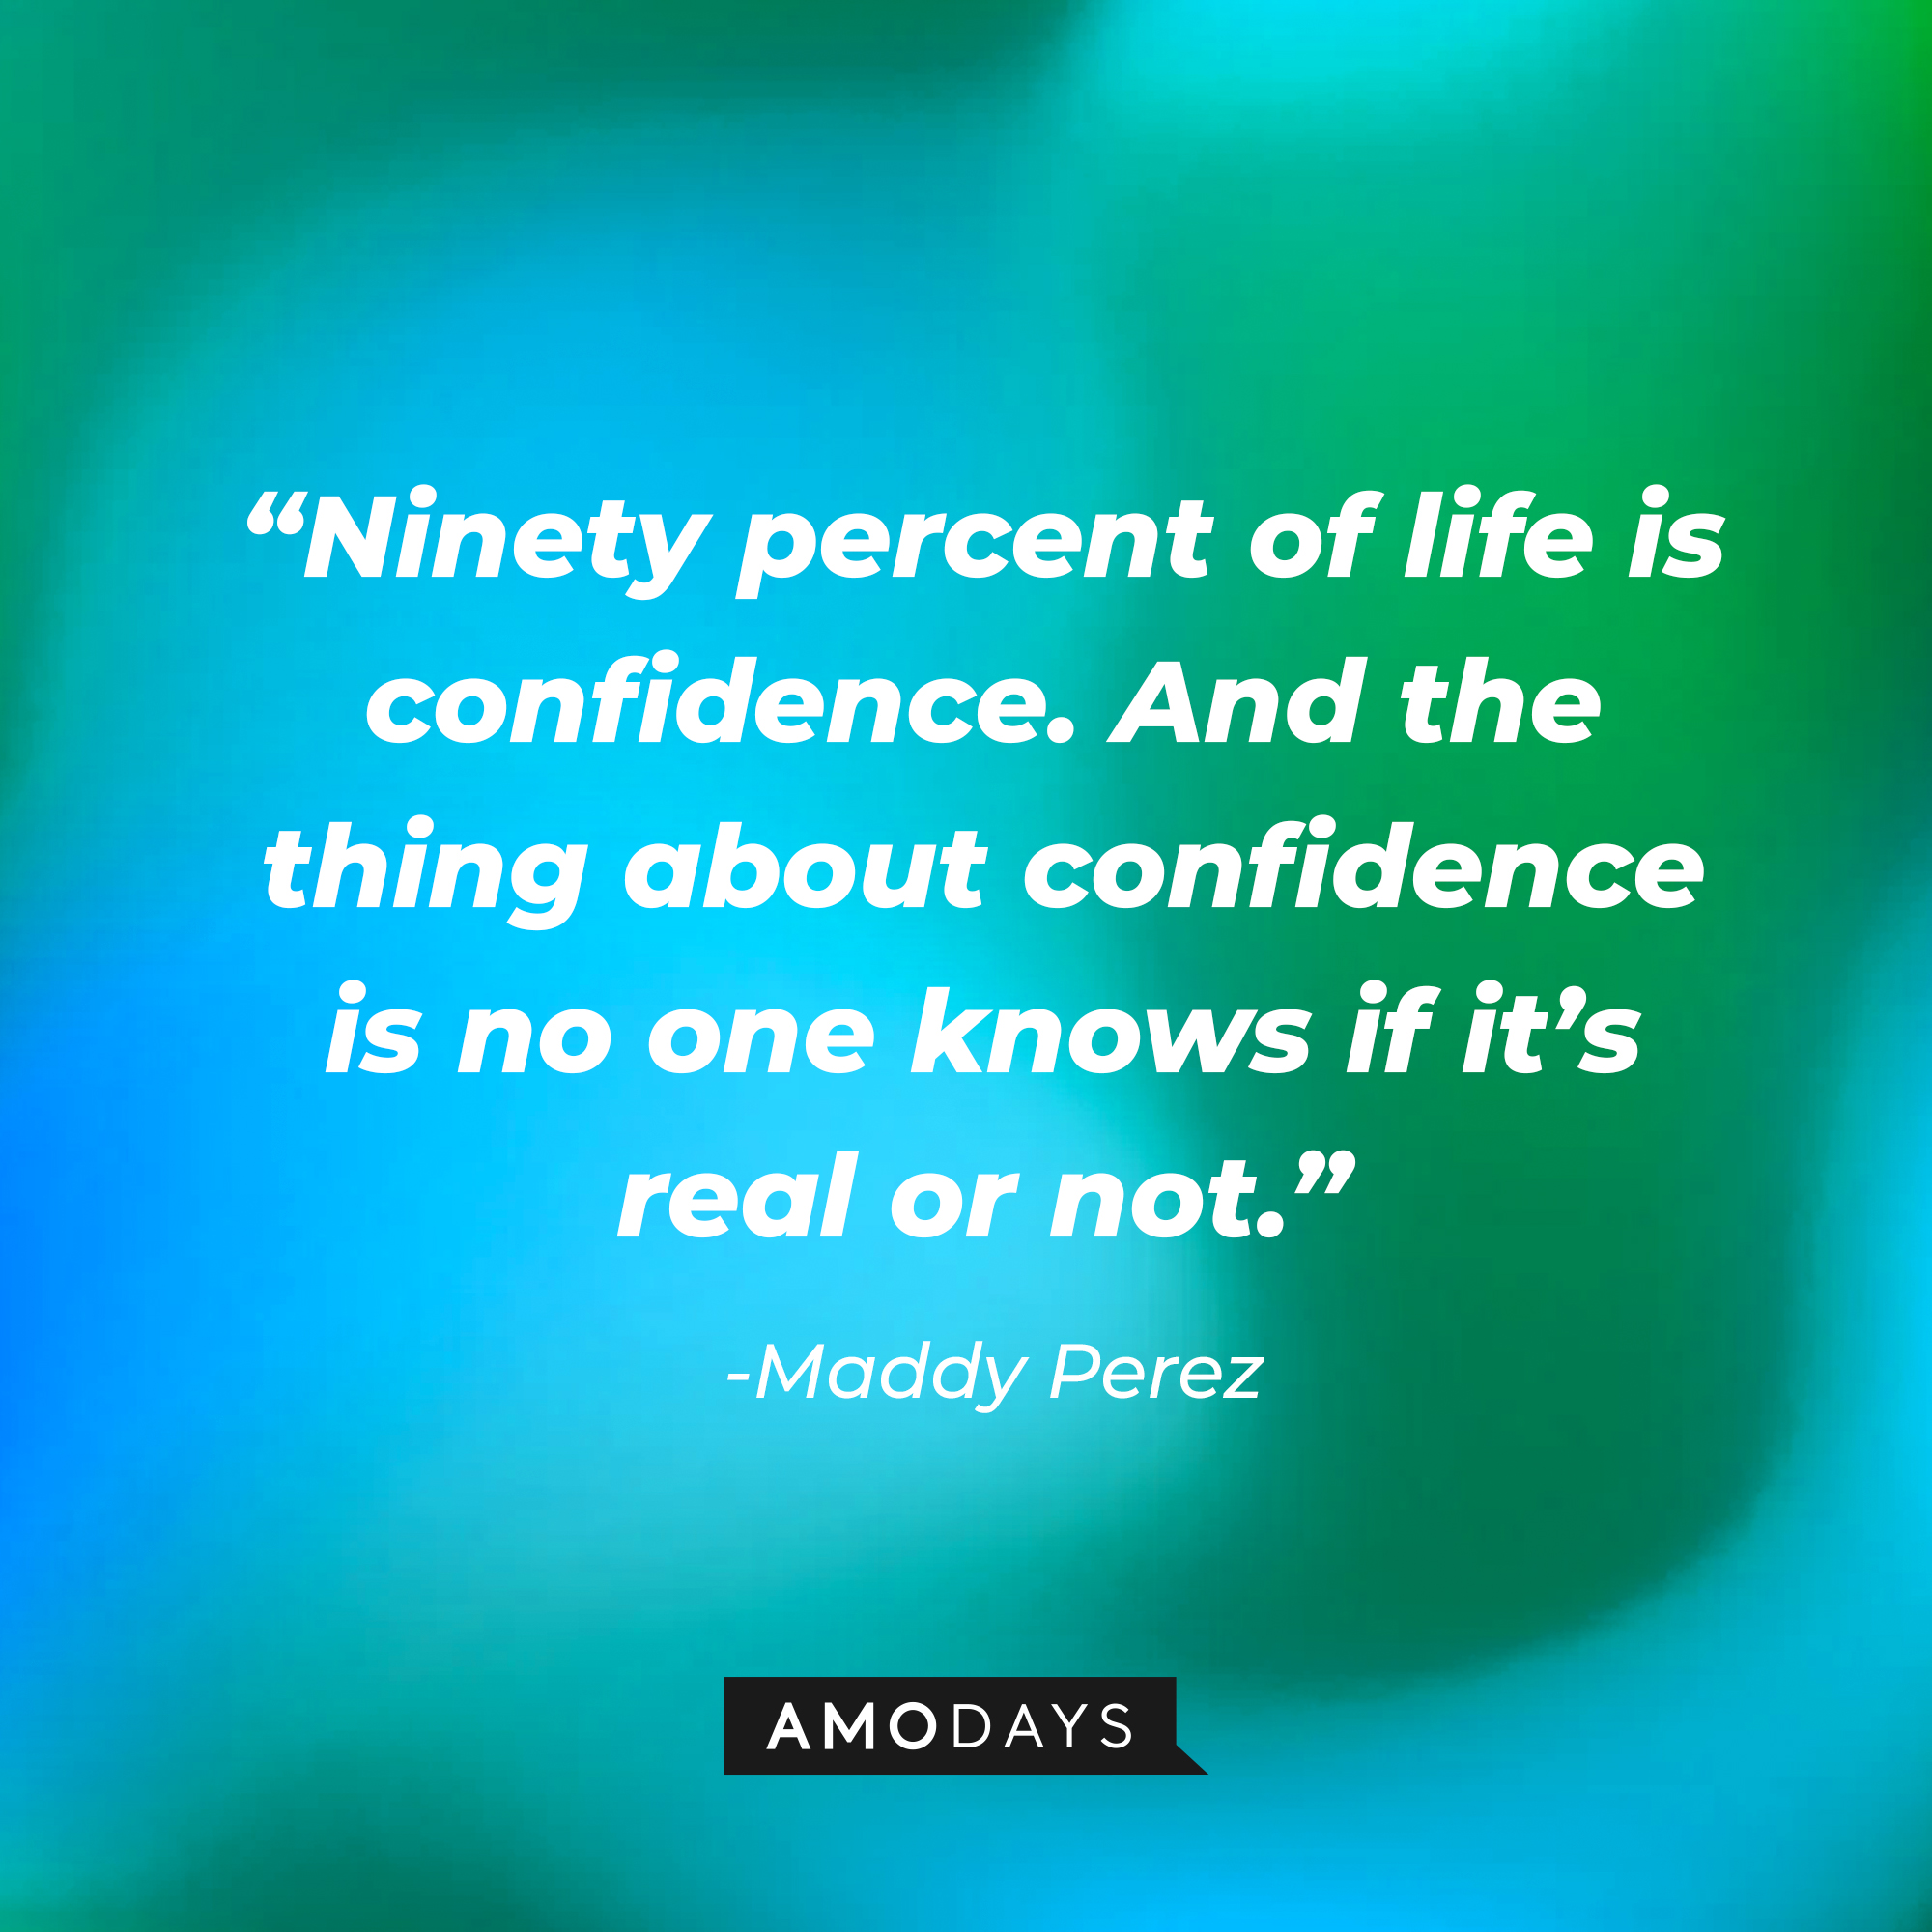 Maddy Perez' quote: “Ninety percent of life is confidence. And the thing about confidence is no one knows if it’s real or not.” | Source: AmoDays